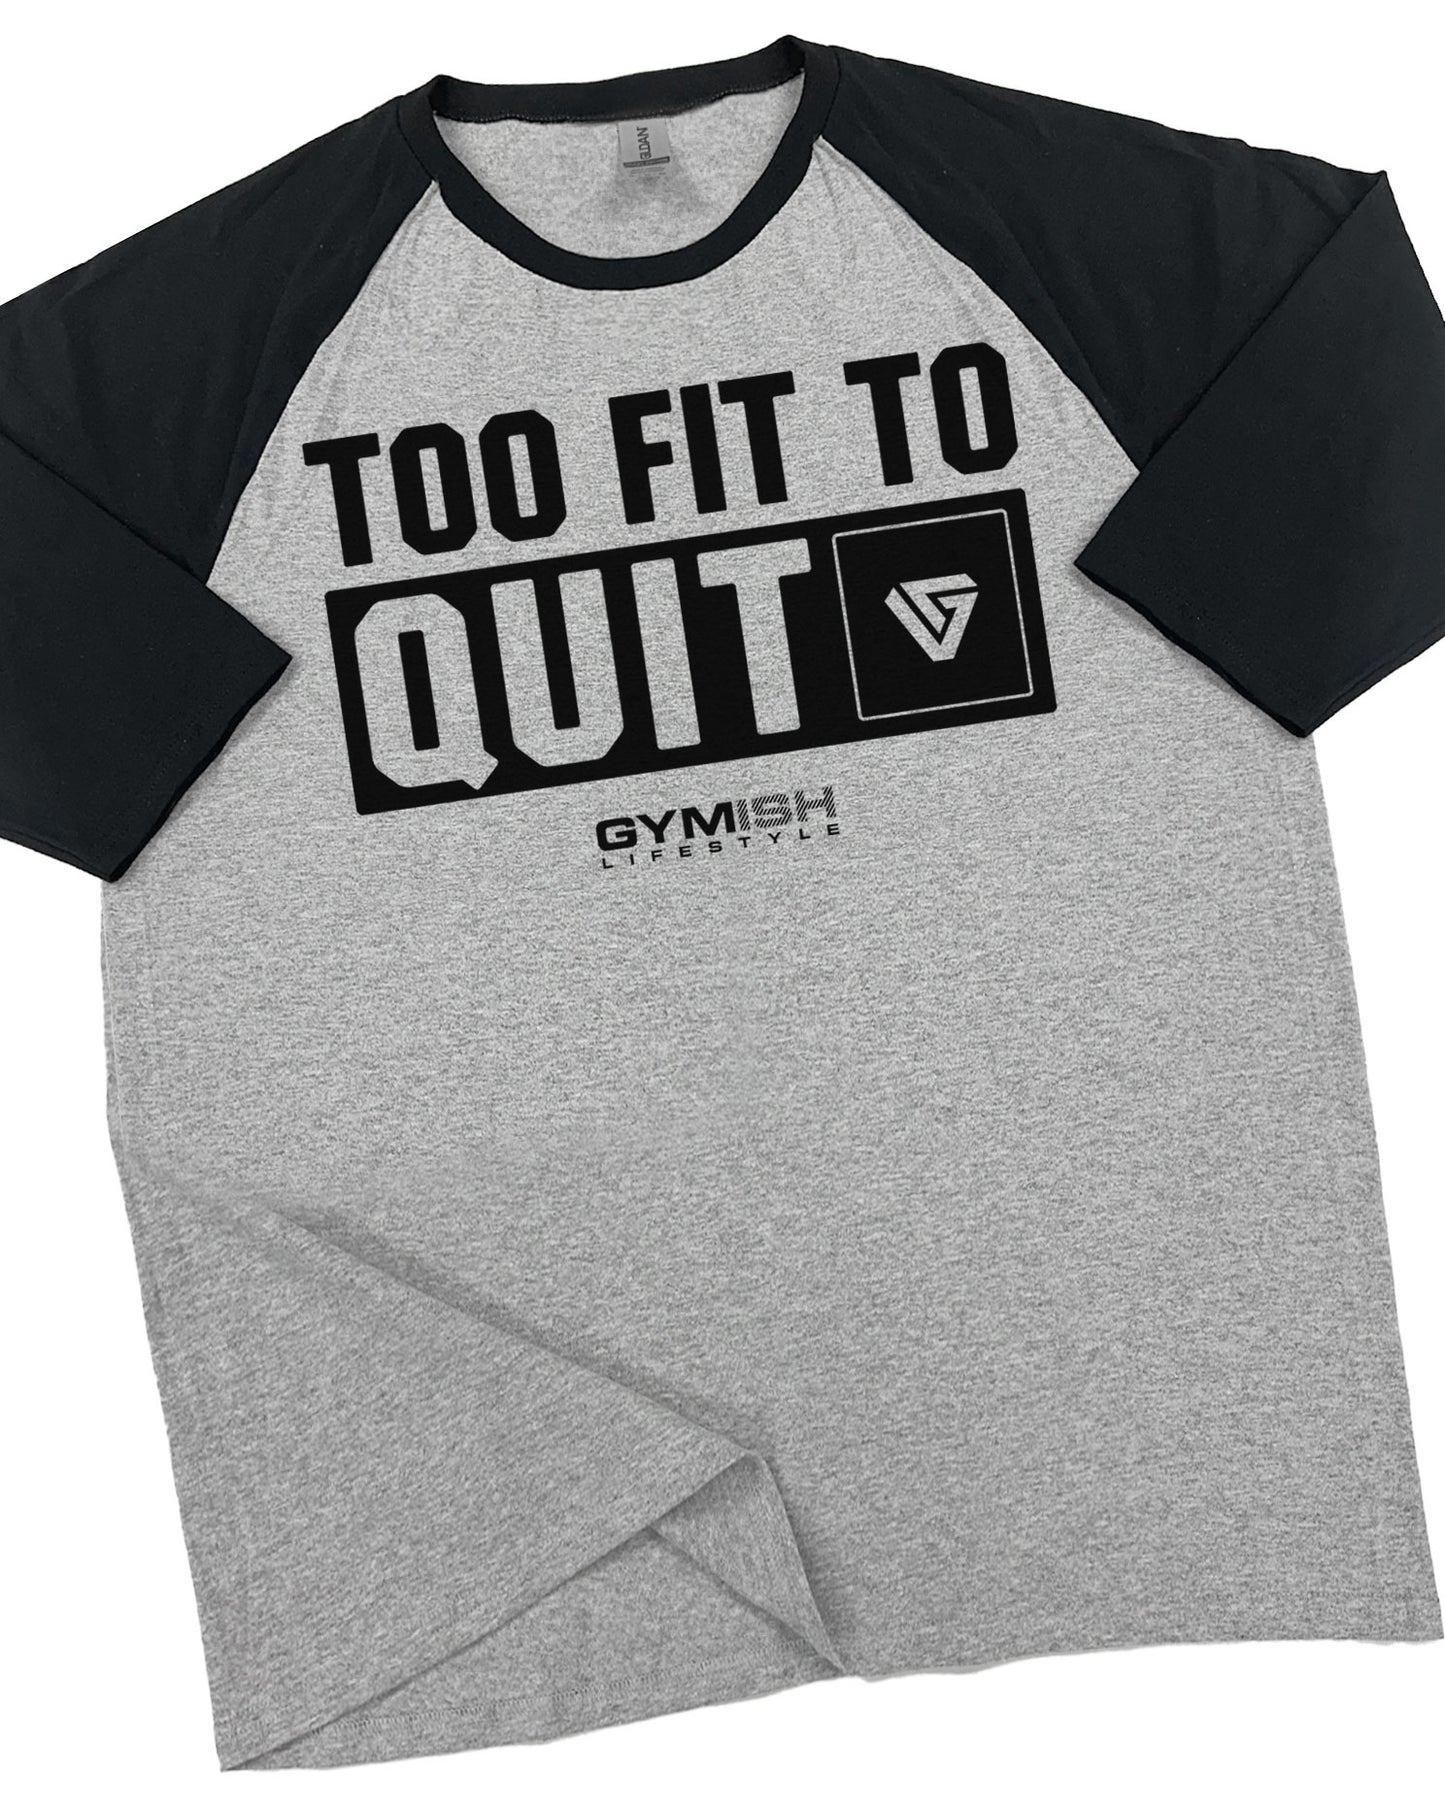 88- RAGLAN Too Fit To Quit Workout Gym T-Shirt for Men